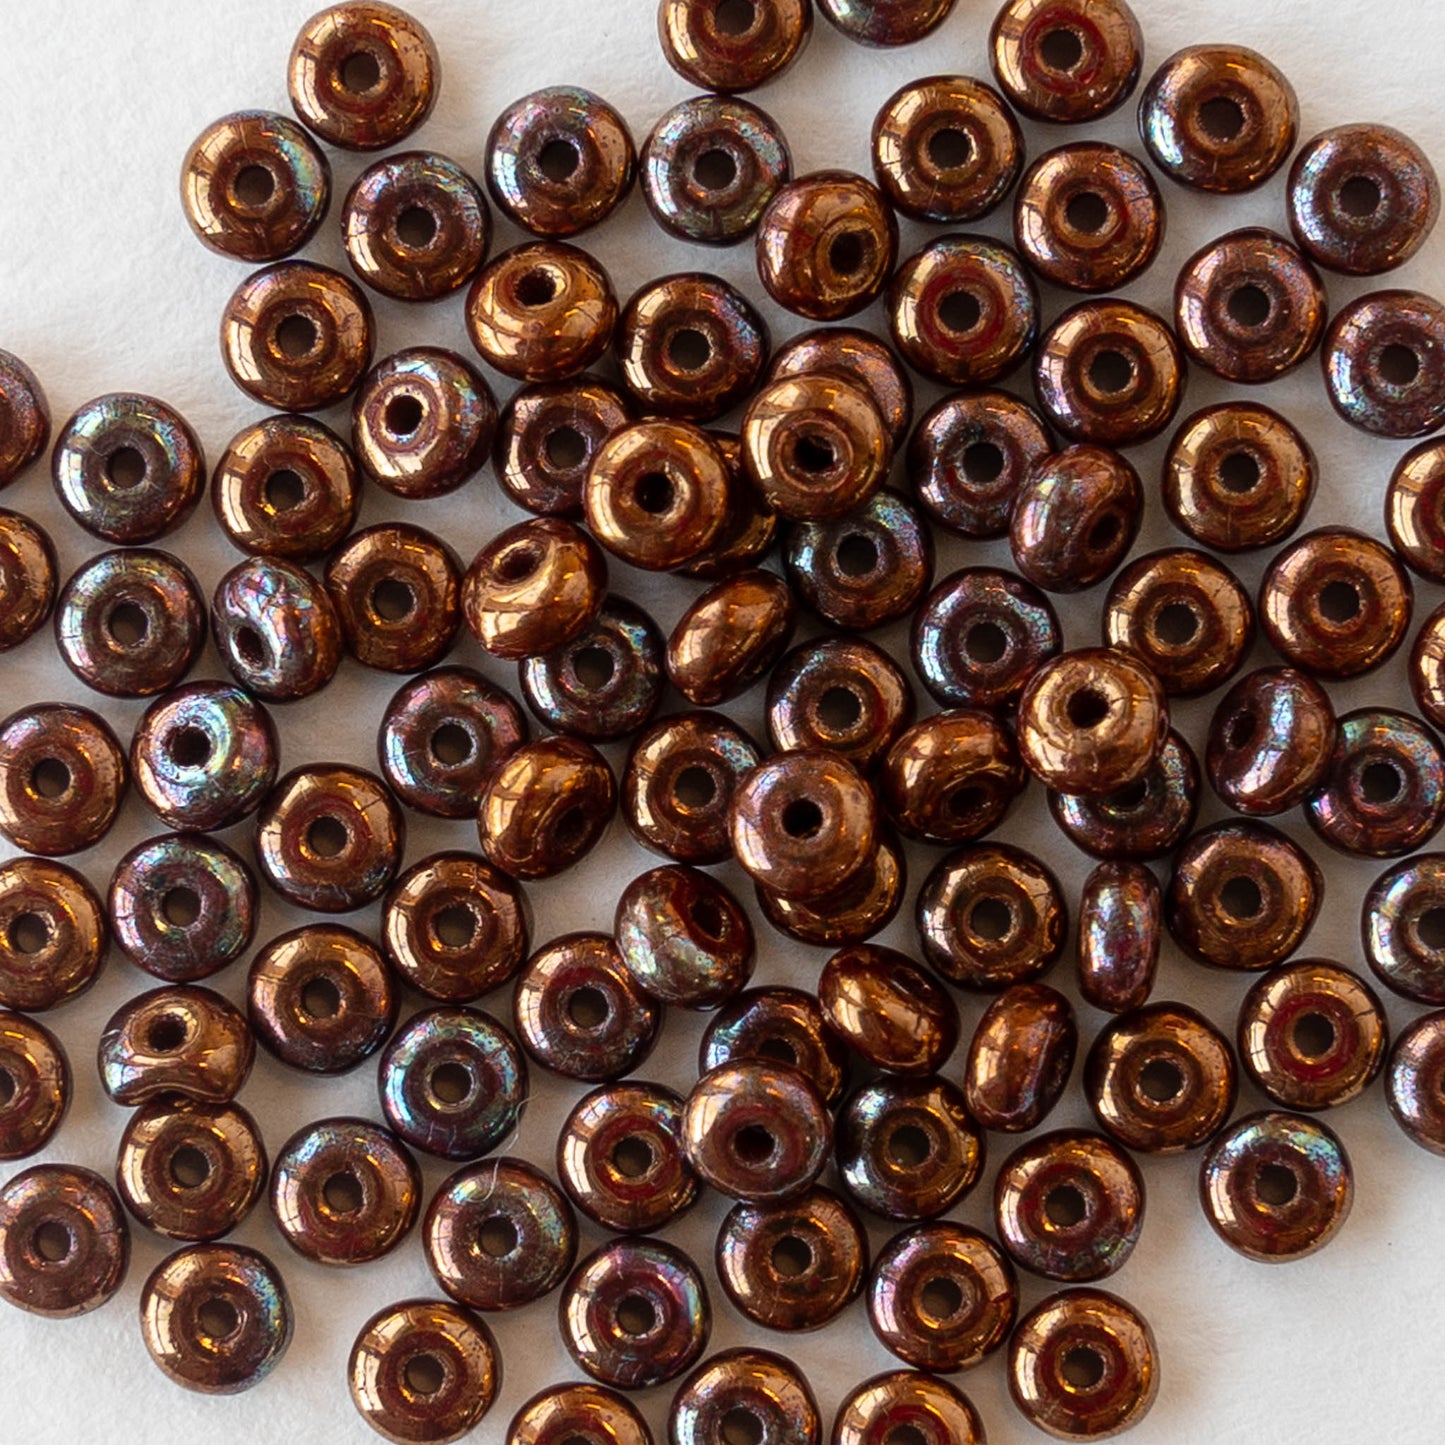 3mm Rondelle Beads - Red Iris Luster - 100 Beads